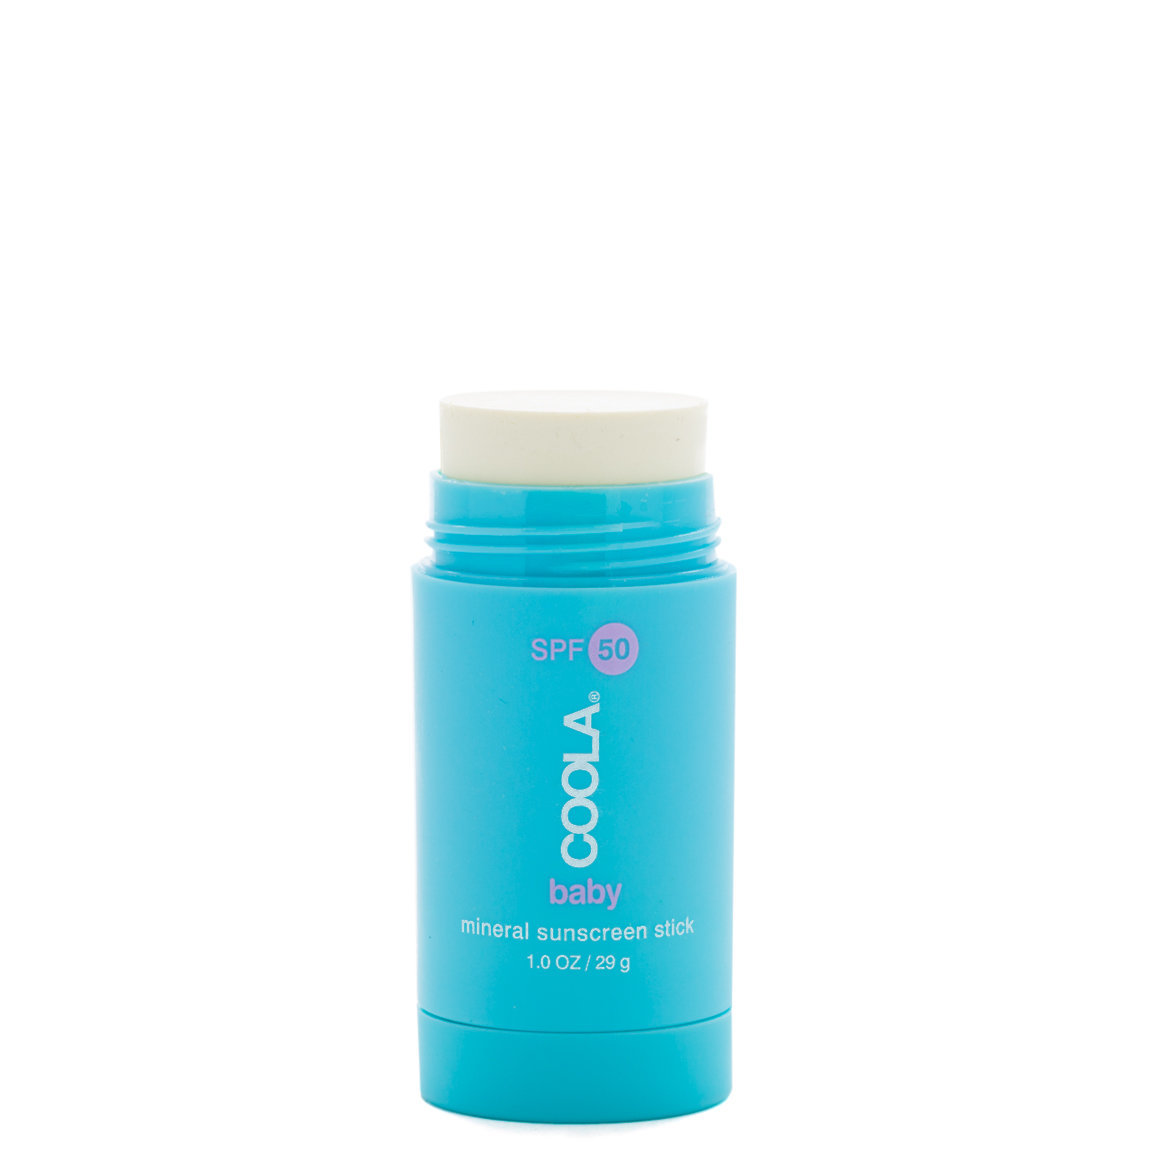 coola sunscreen where to buy